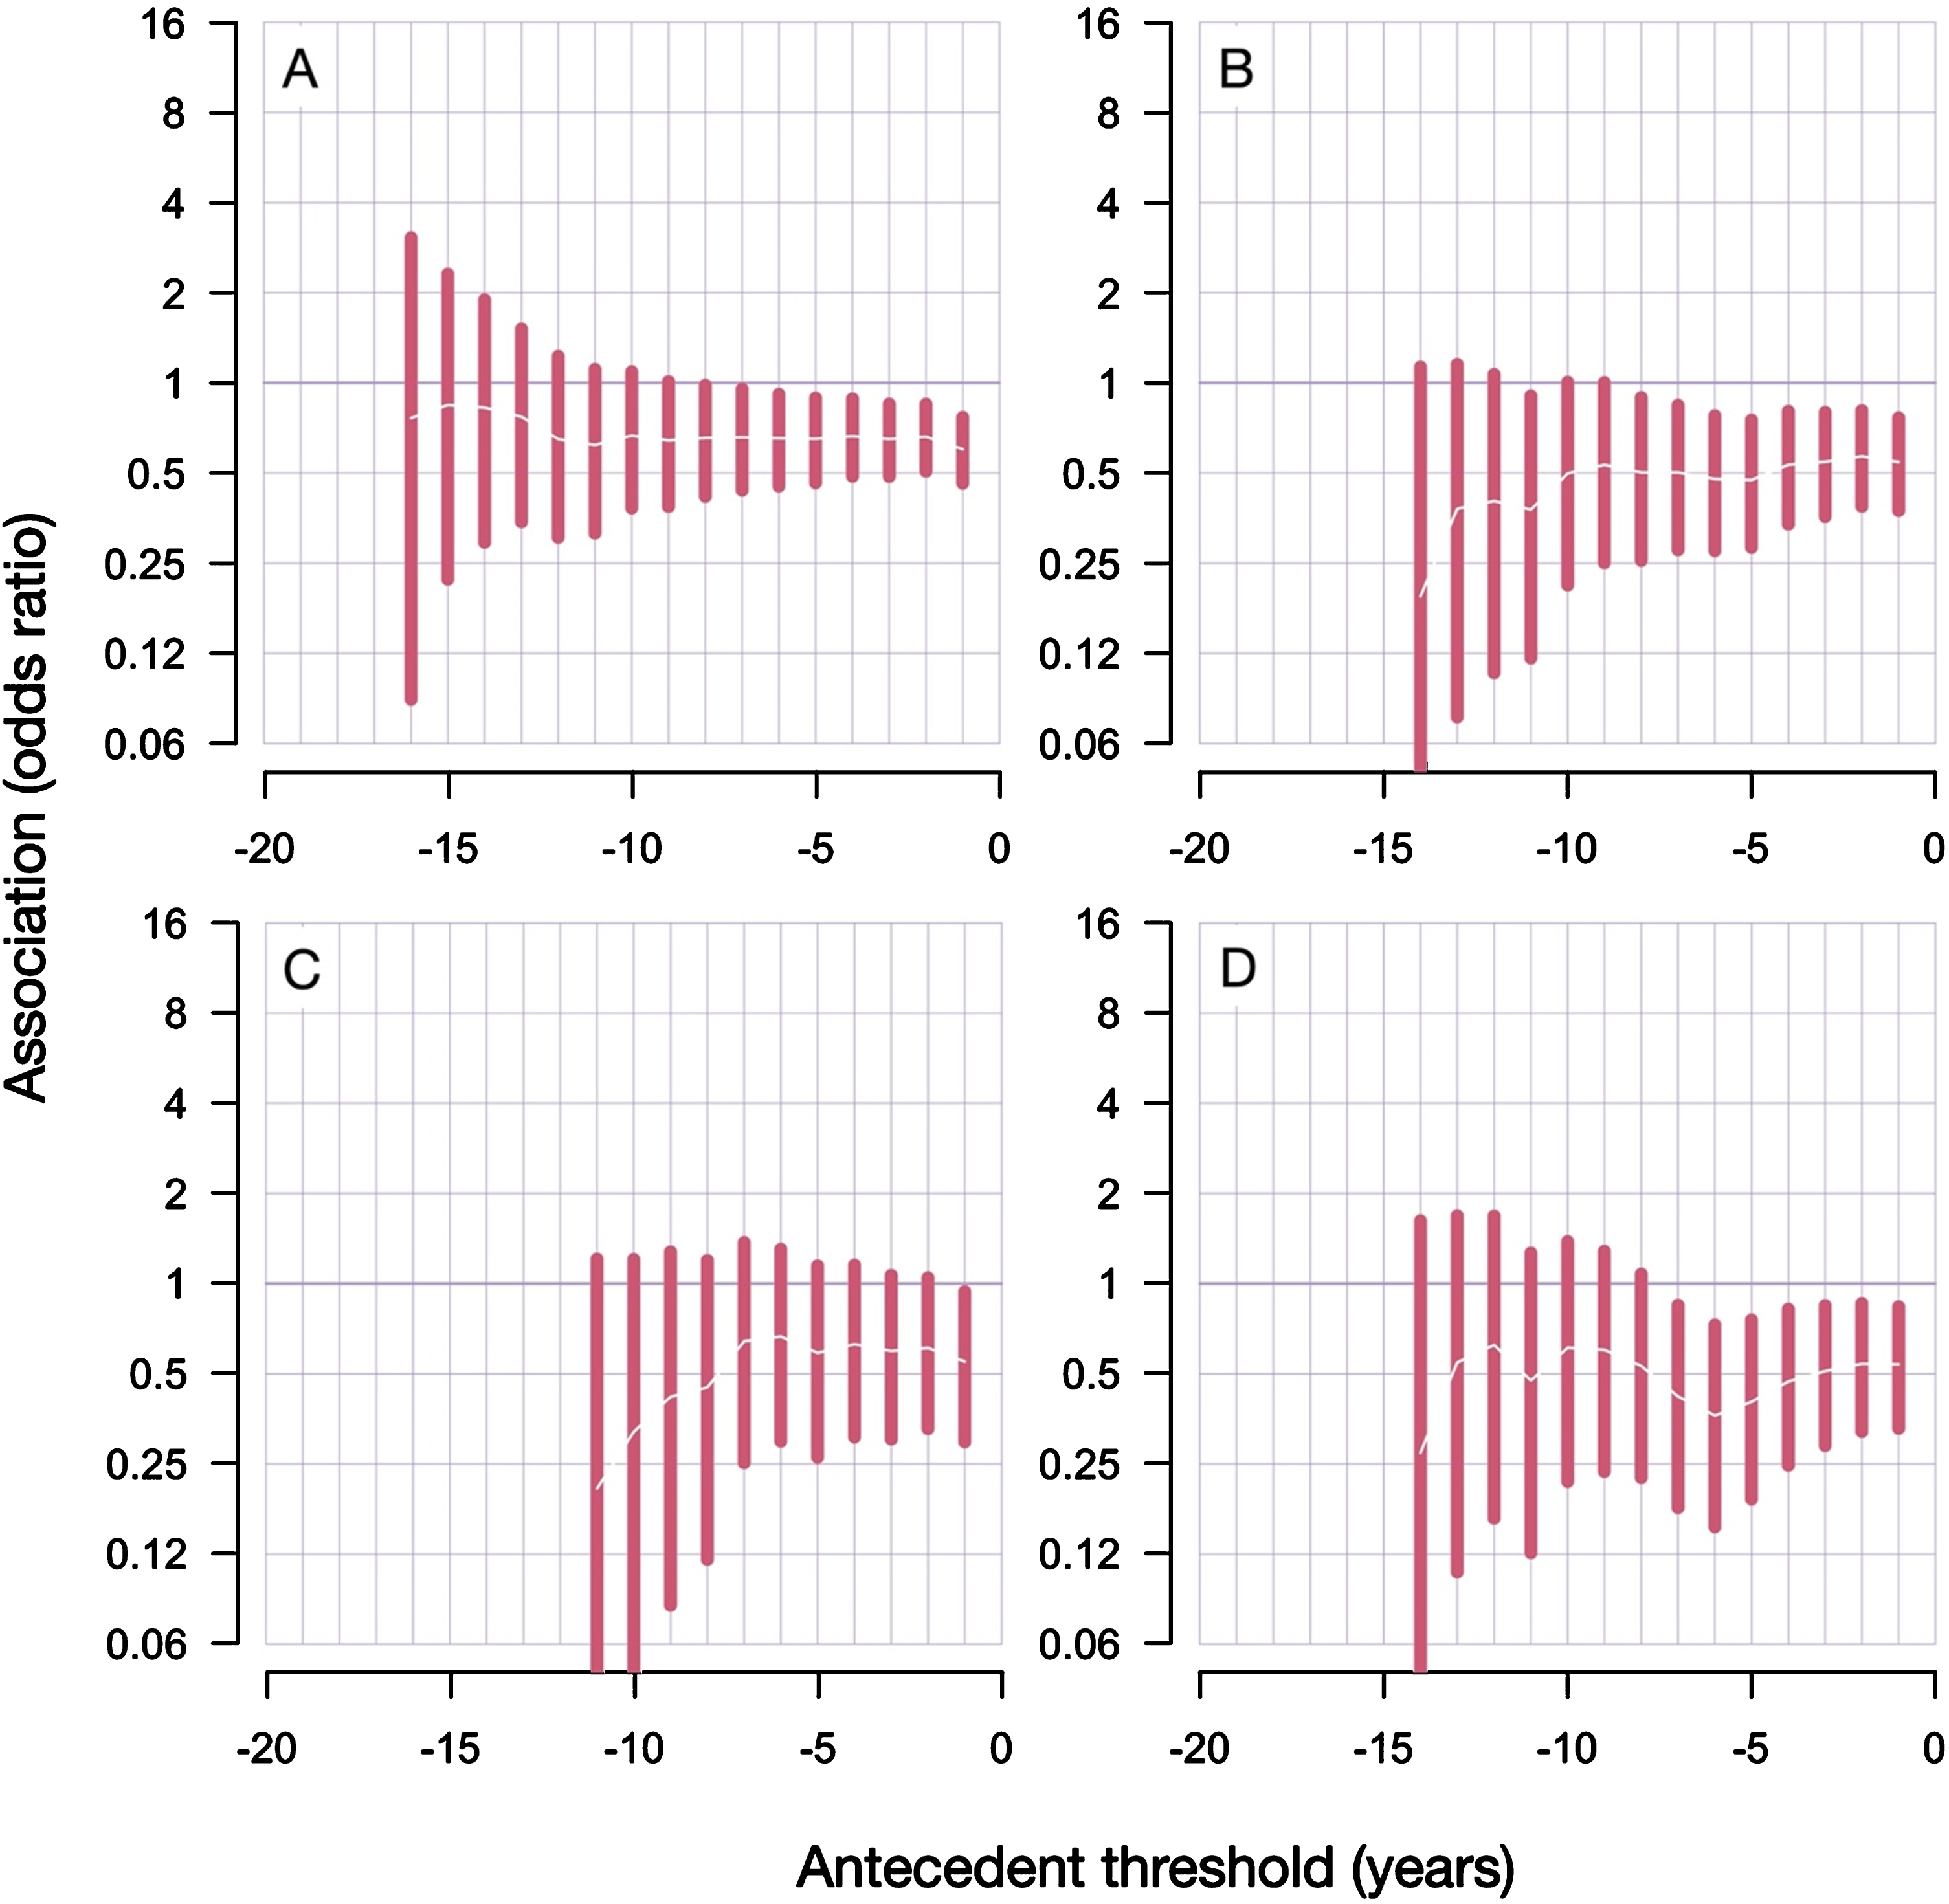 Results from antecedent analyses reveal decreased risk of PD diagnoses after RA diagnosis. A) Inclusive analyses; B) conservative analyses; C) conservative analyses with only males; D) conservative analyses with only females. Antecedent threshold is the minimal number of years separating antecedent (RA) and the main outcome (PD), also called “lag period”. The bars show 95% confidence intervals of the estimated odds ratio. Tabulated results are presented in the Supplementary Tables 1 and 2.